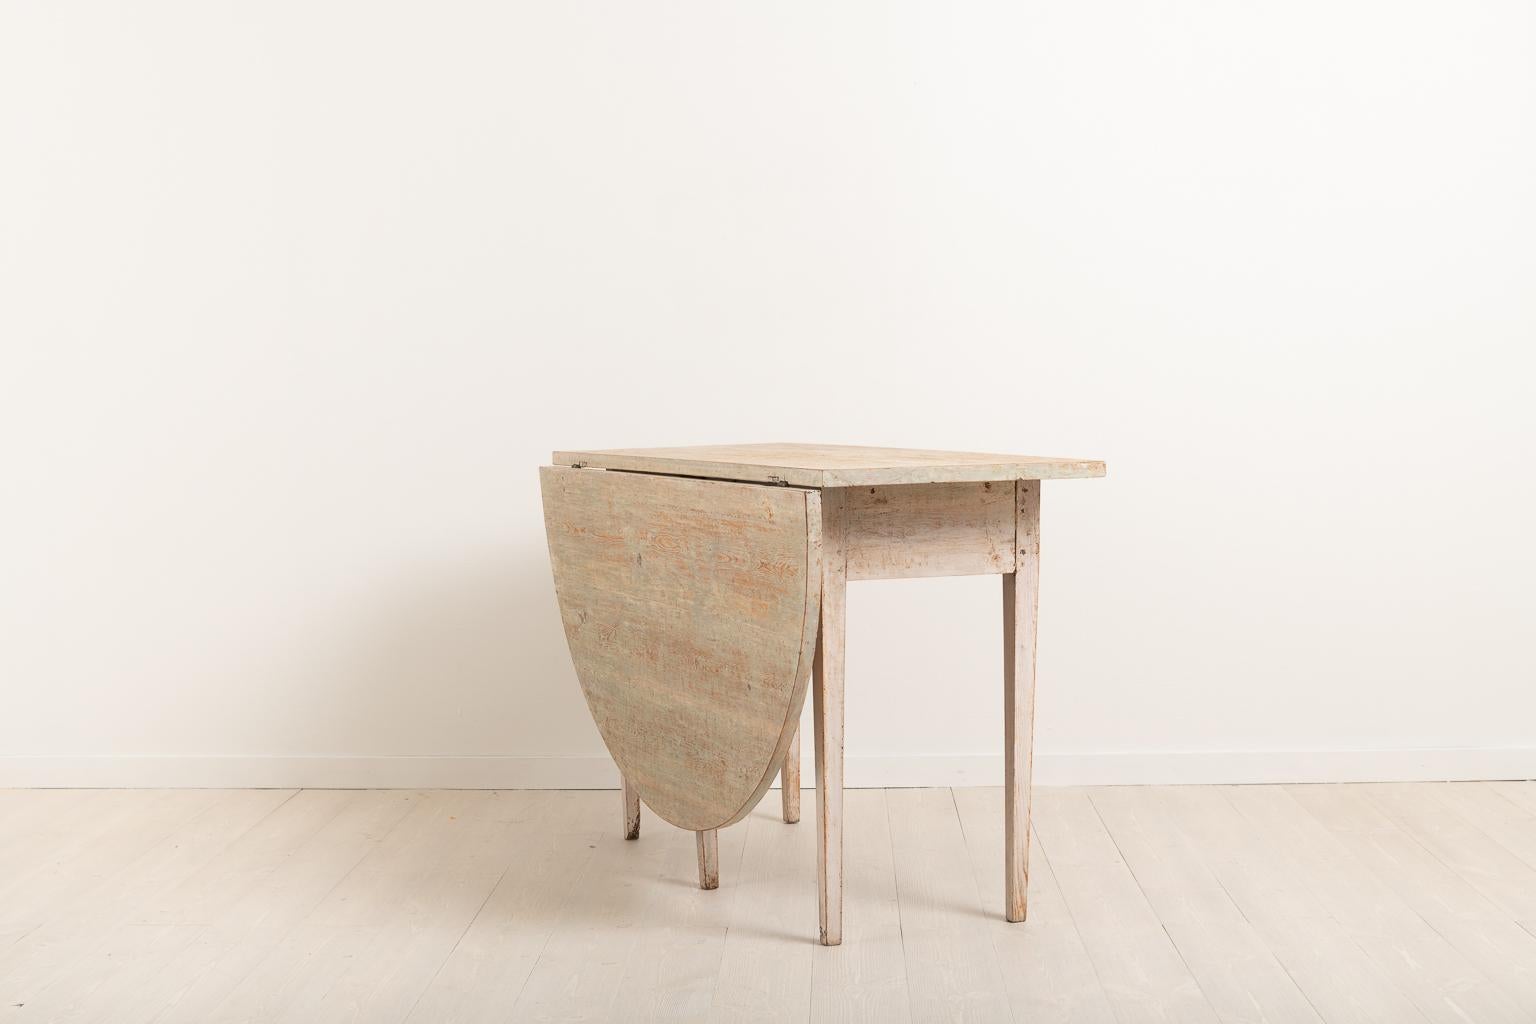 Swedish Gustavian drop-leaf table from the early 19th century. The table is dry scarped to the original paint. It is meant to stand against a wall or under a window, hence the single drop leaf. Manufactured circa 1810 in northern Sweden. The table